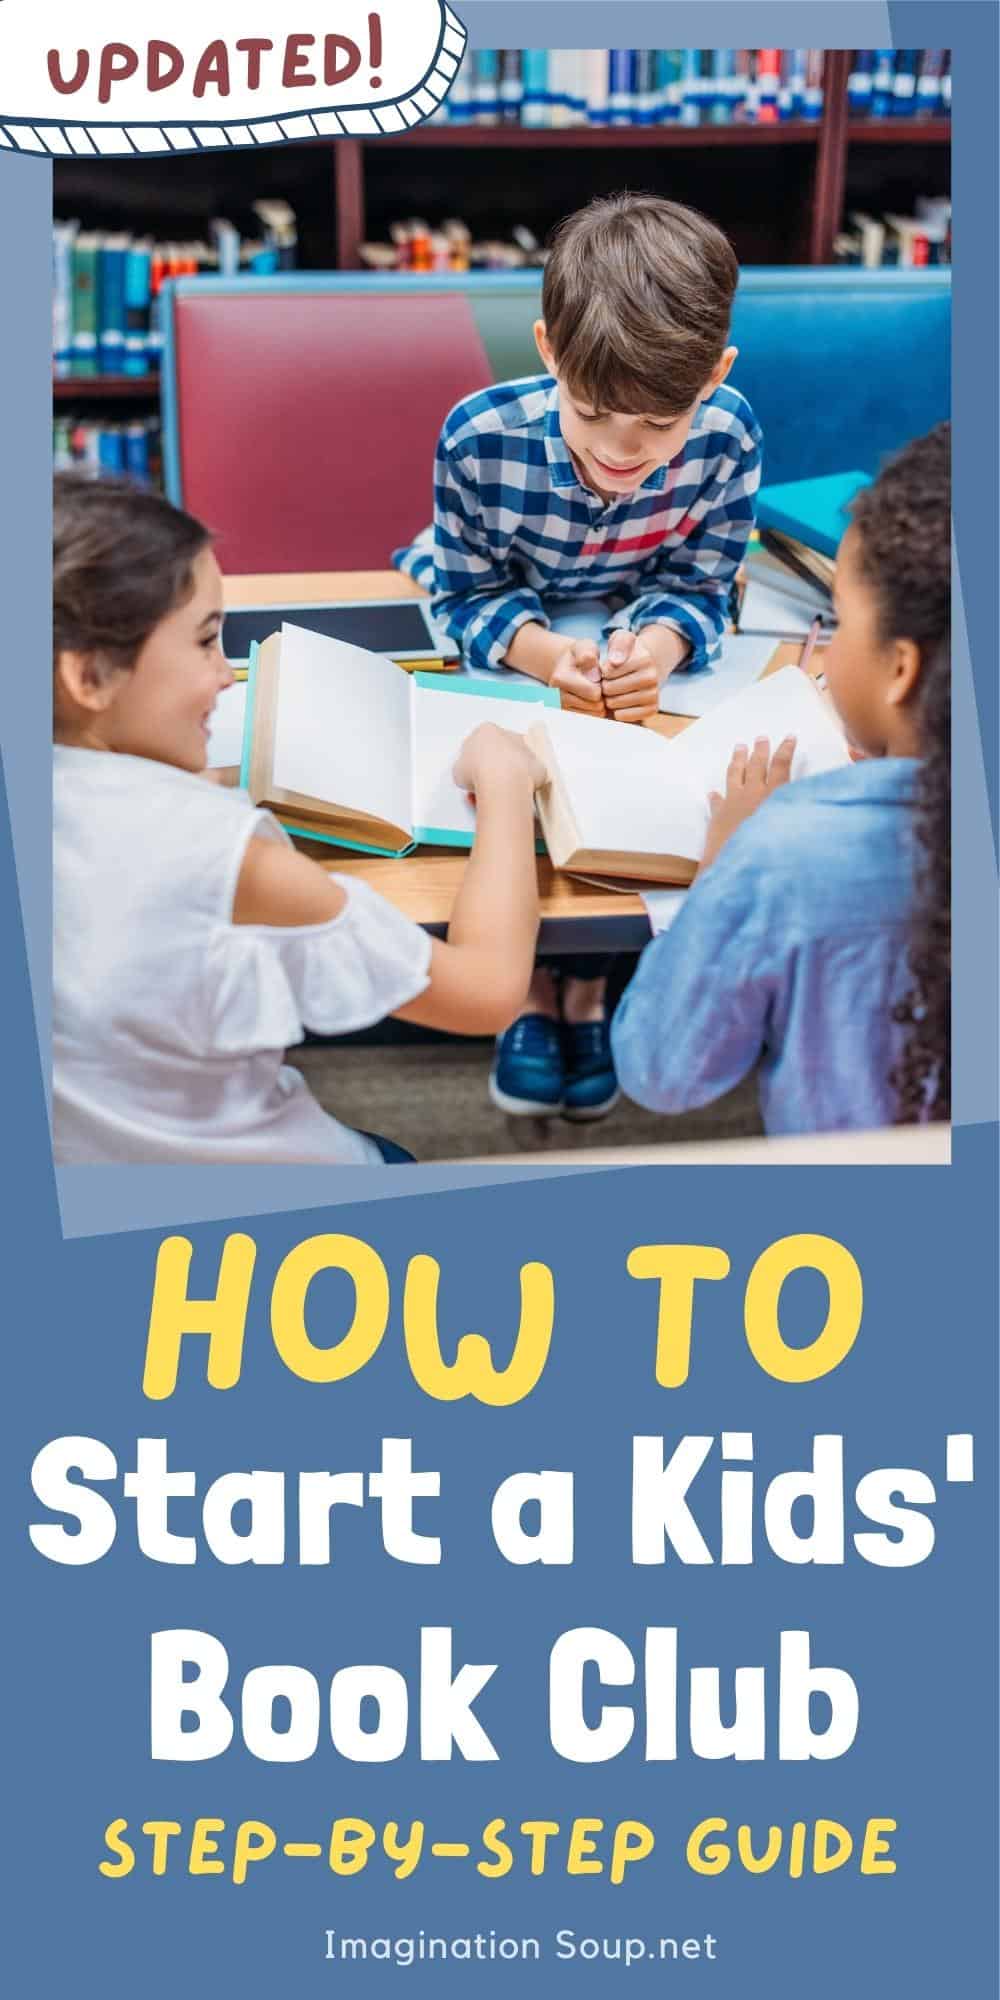 How to Start a Book Club for Kids Guide